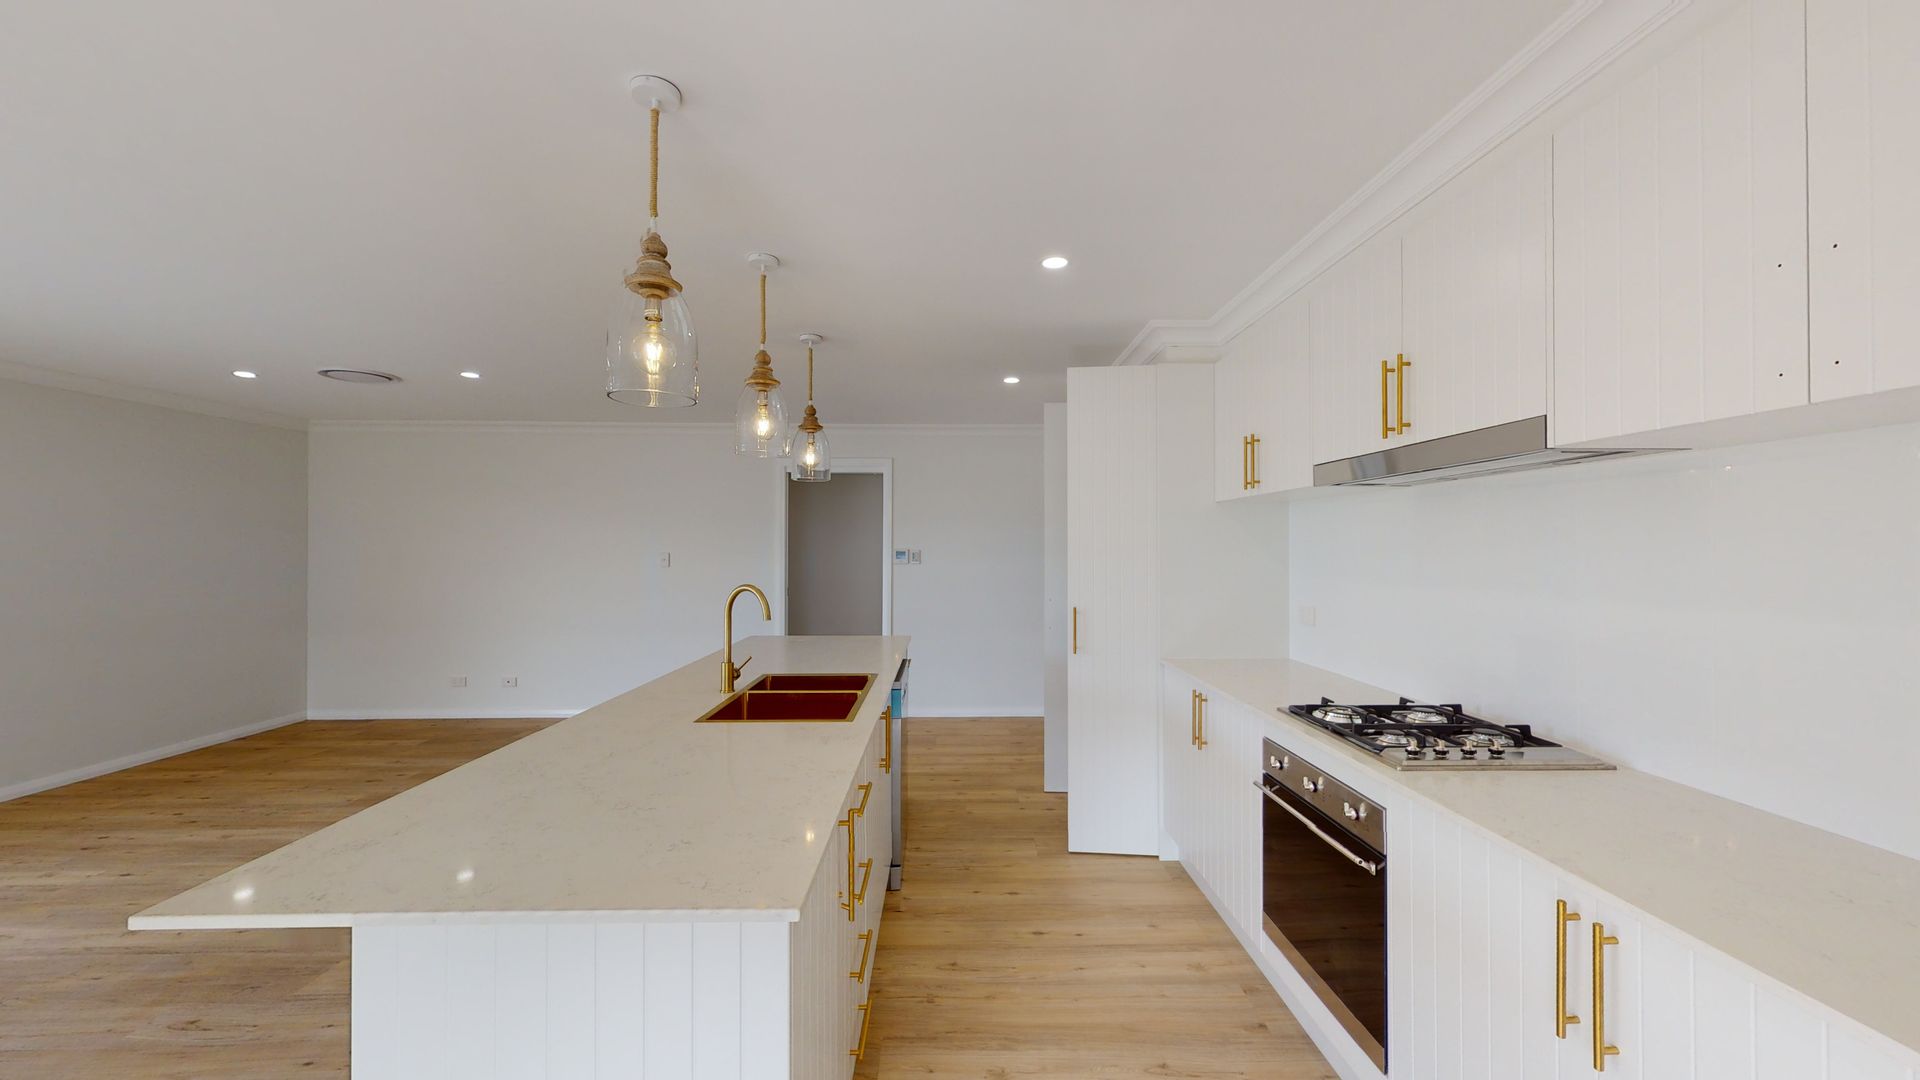 Minimalist Kitchen and Neutral Color Palette — Kitchen Renovations in Dubbo, QLD